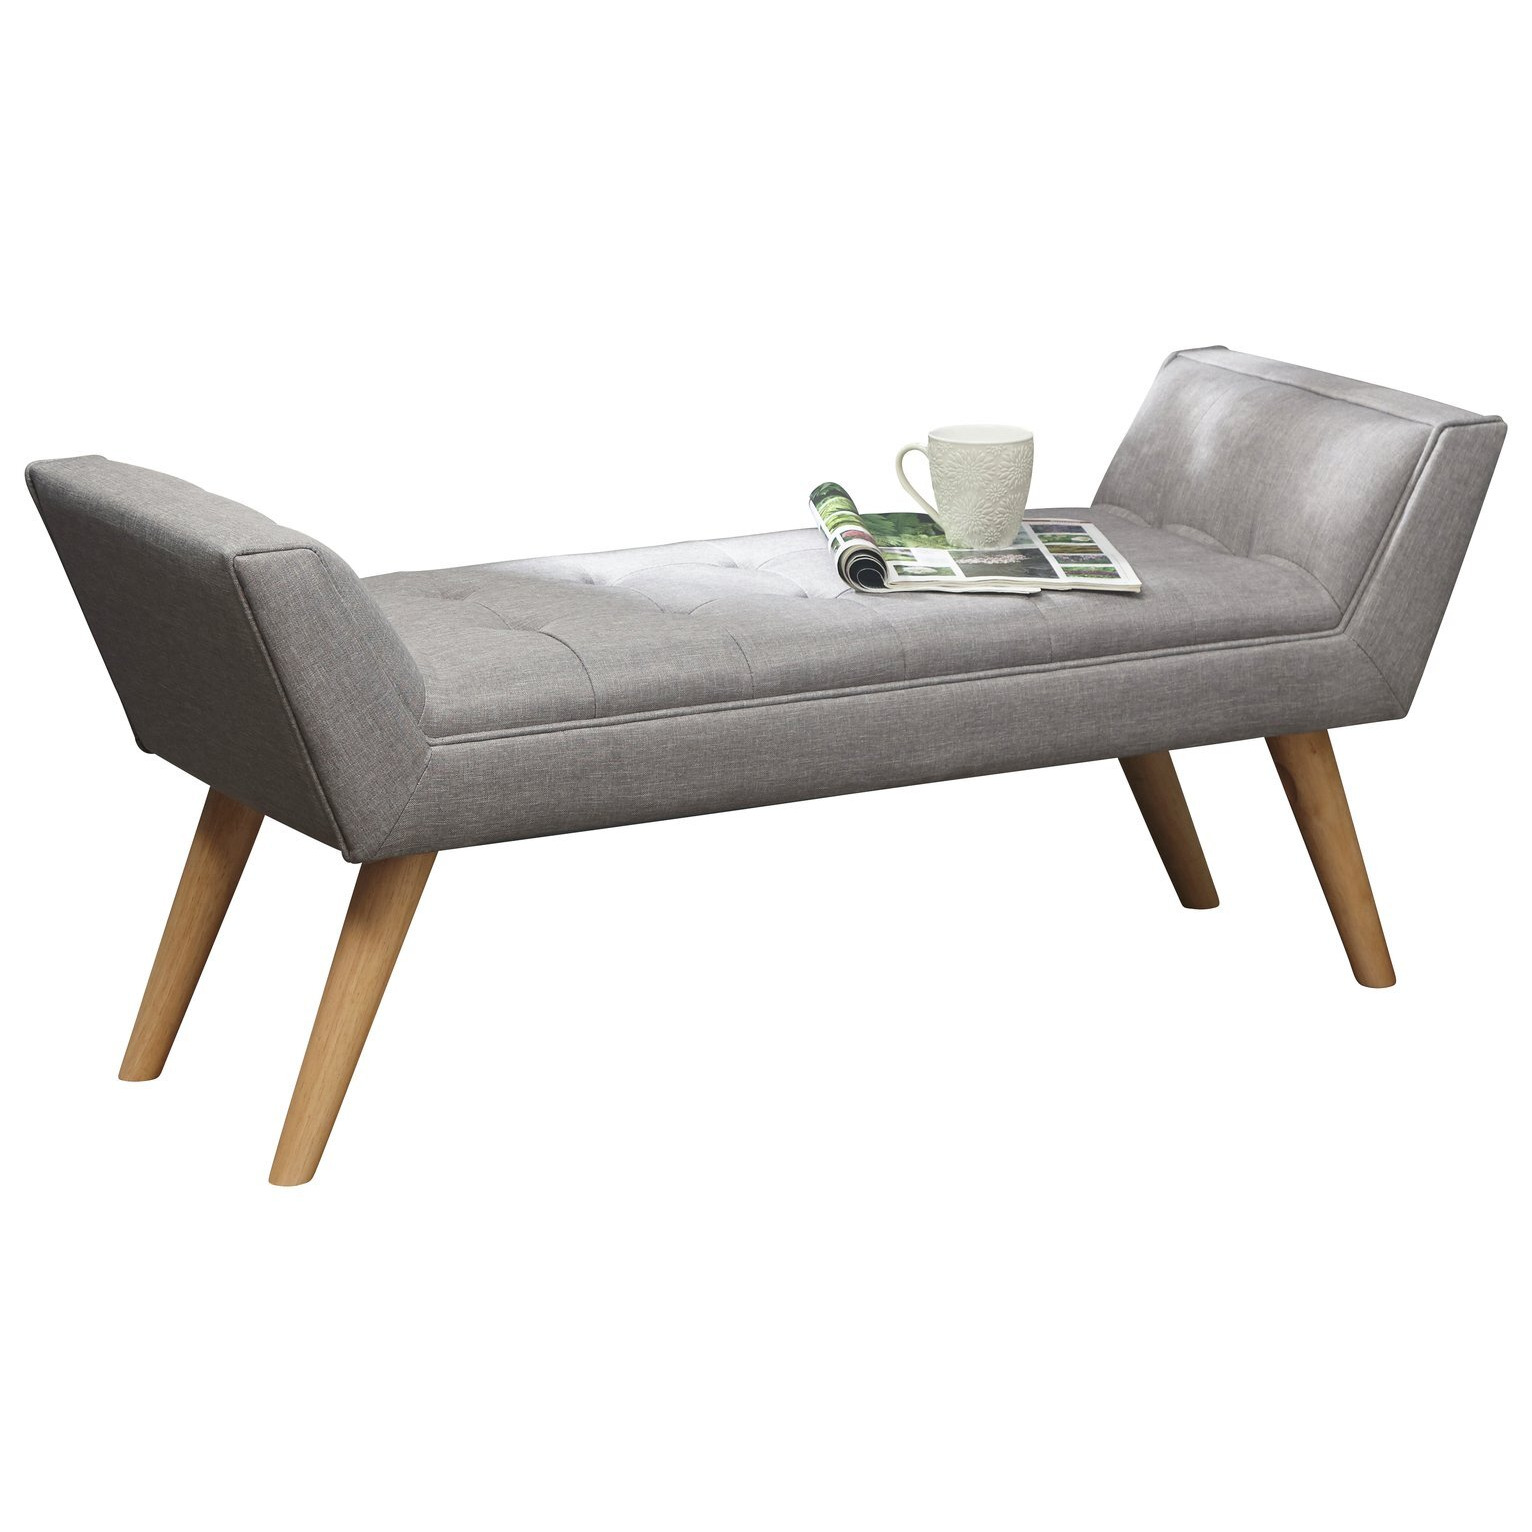 GFW Milan Fabric Upholstered Bench - Grey - image 1